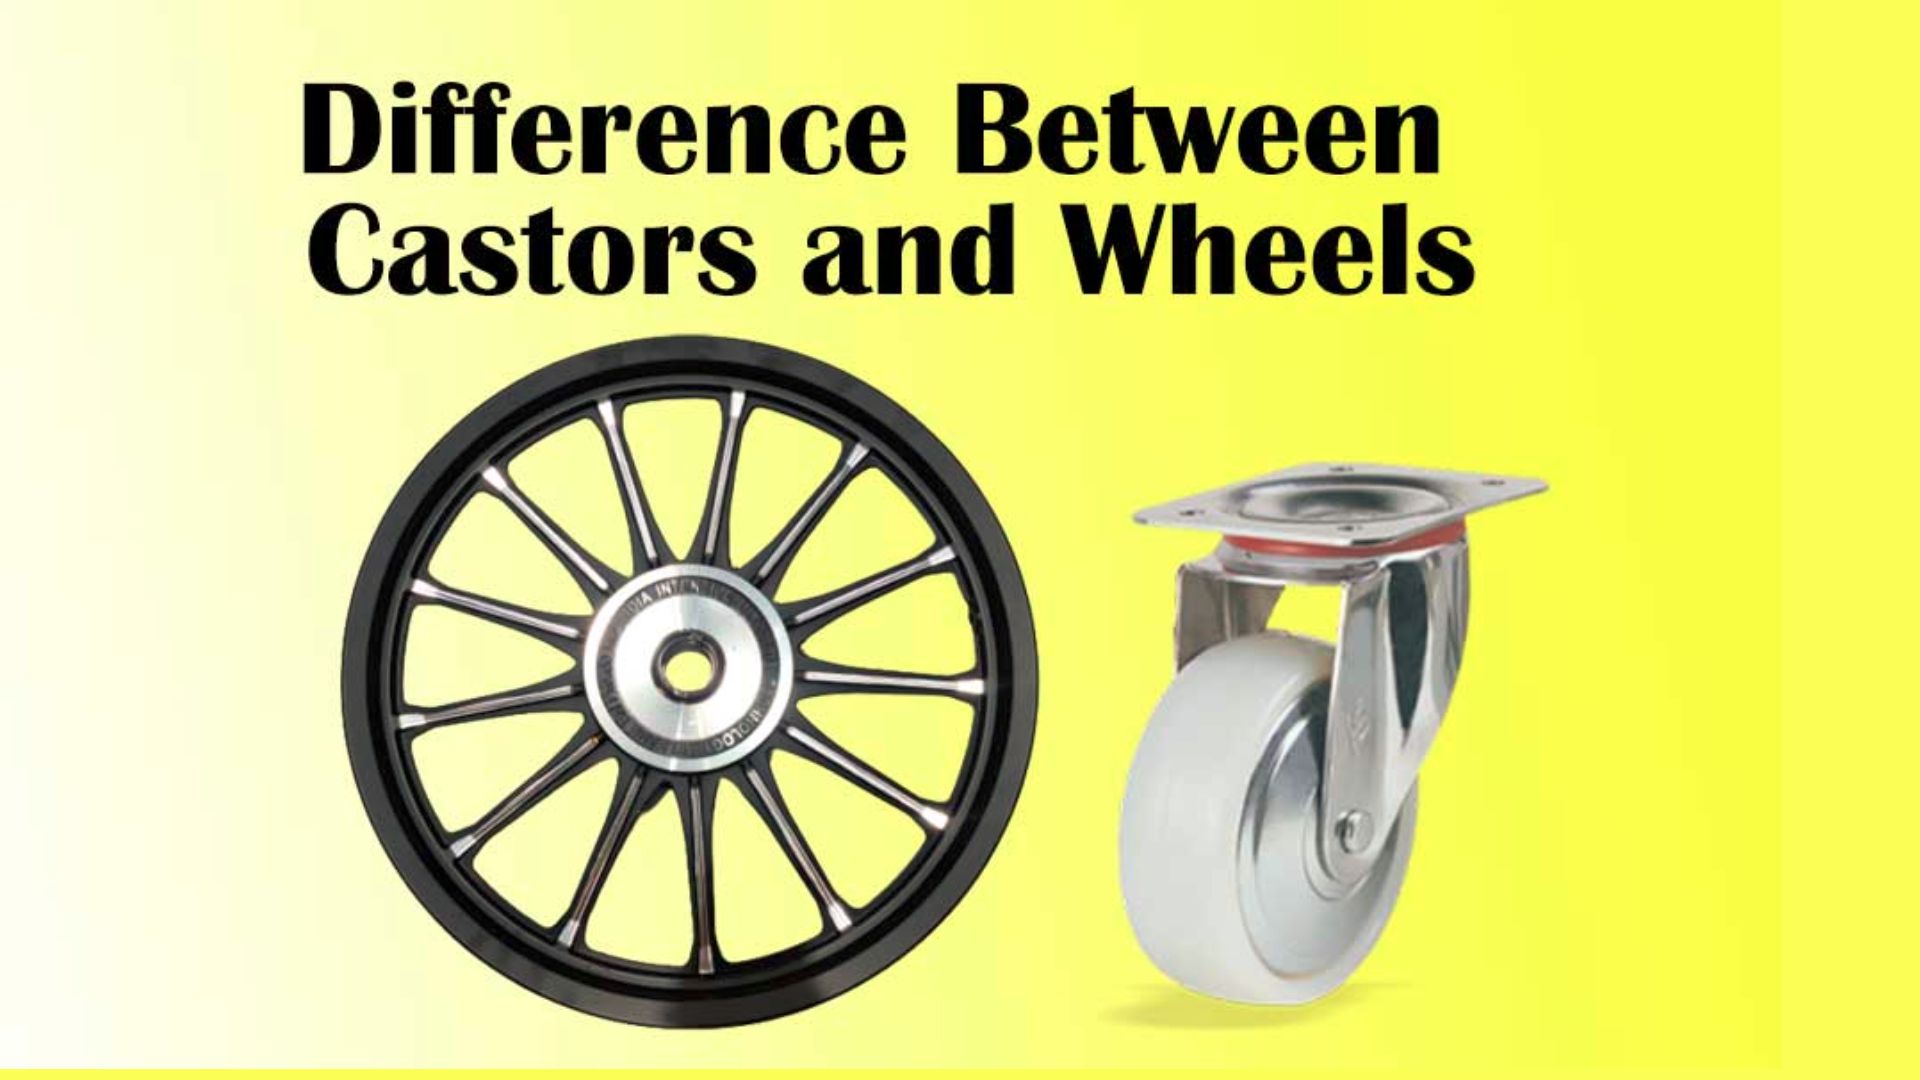 What Is the Difference Between Wheels and Casters?